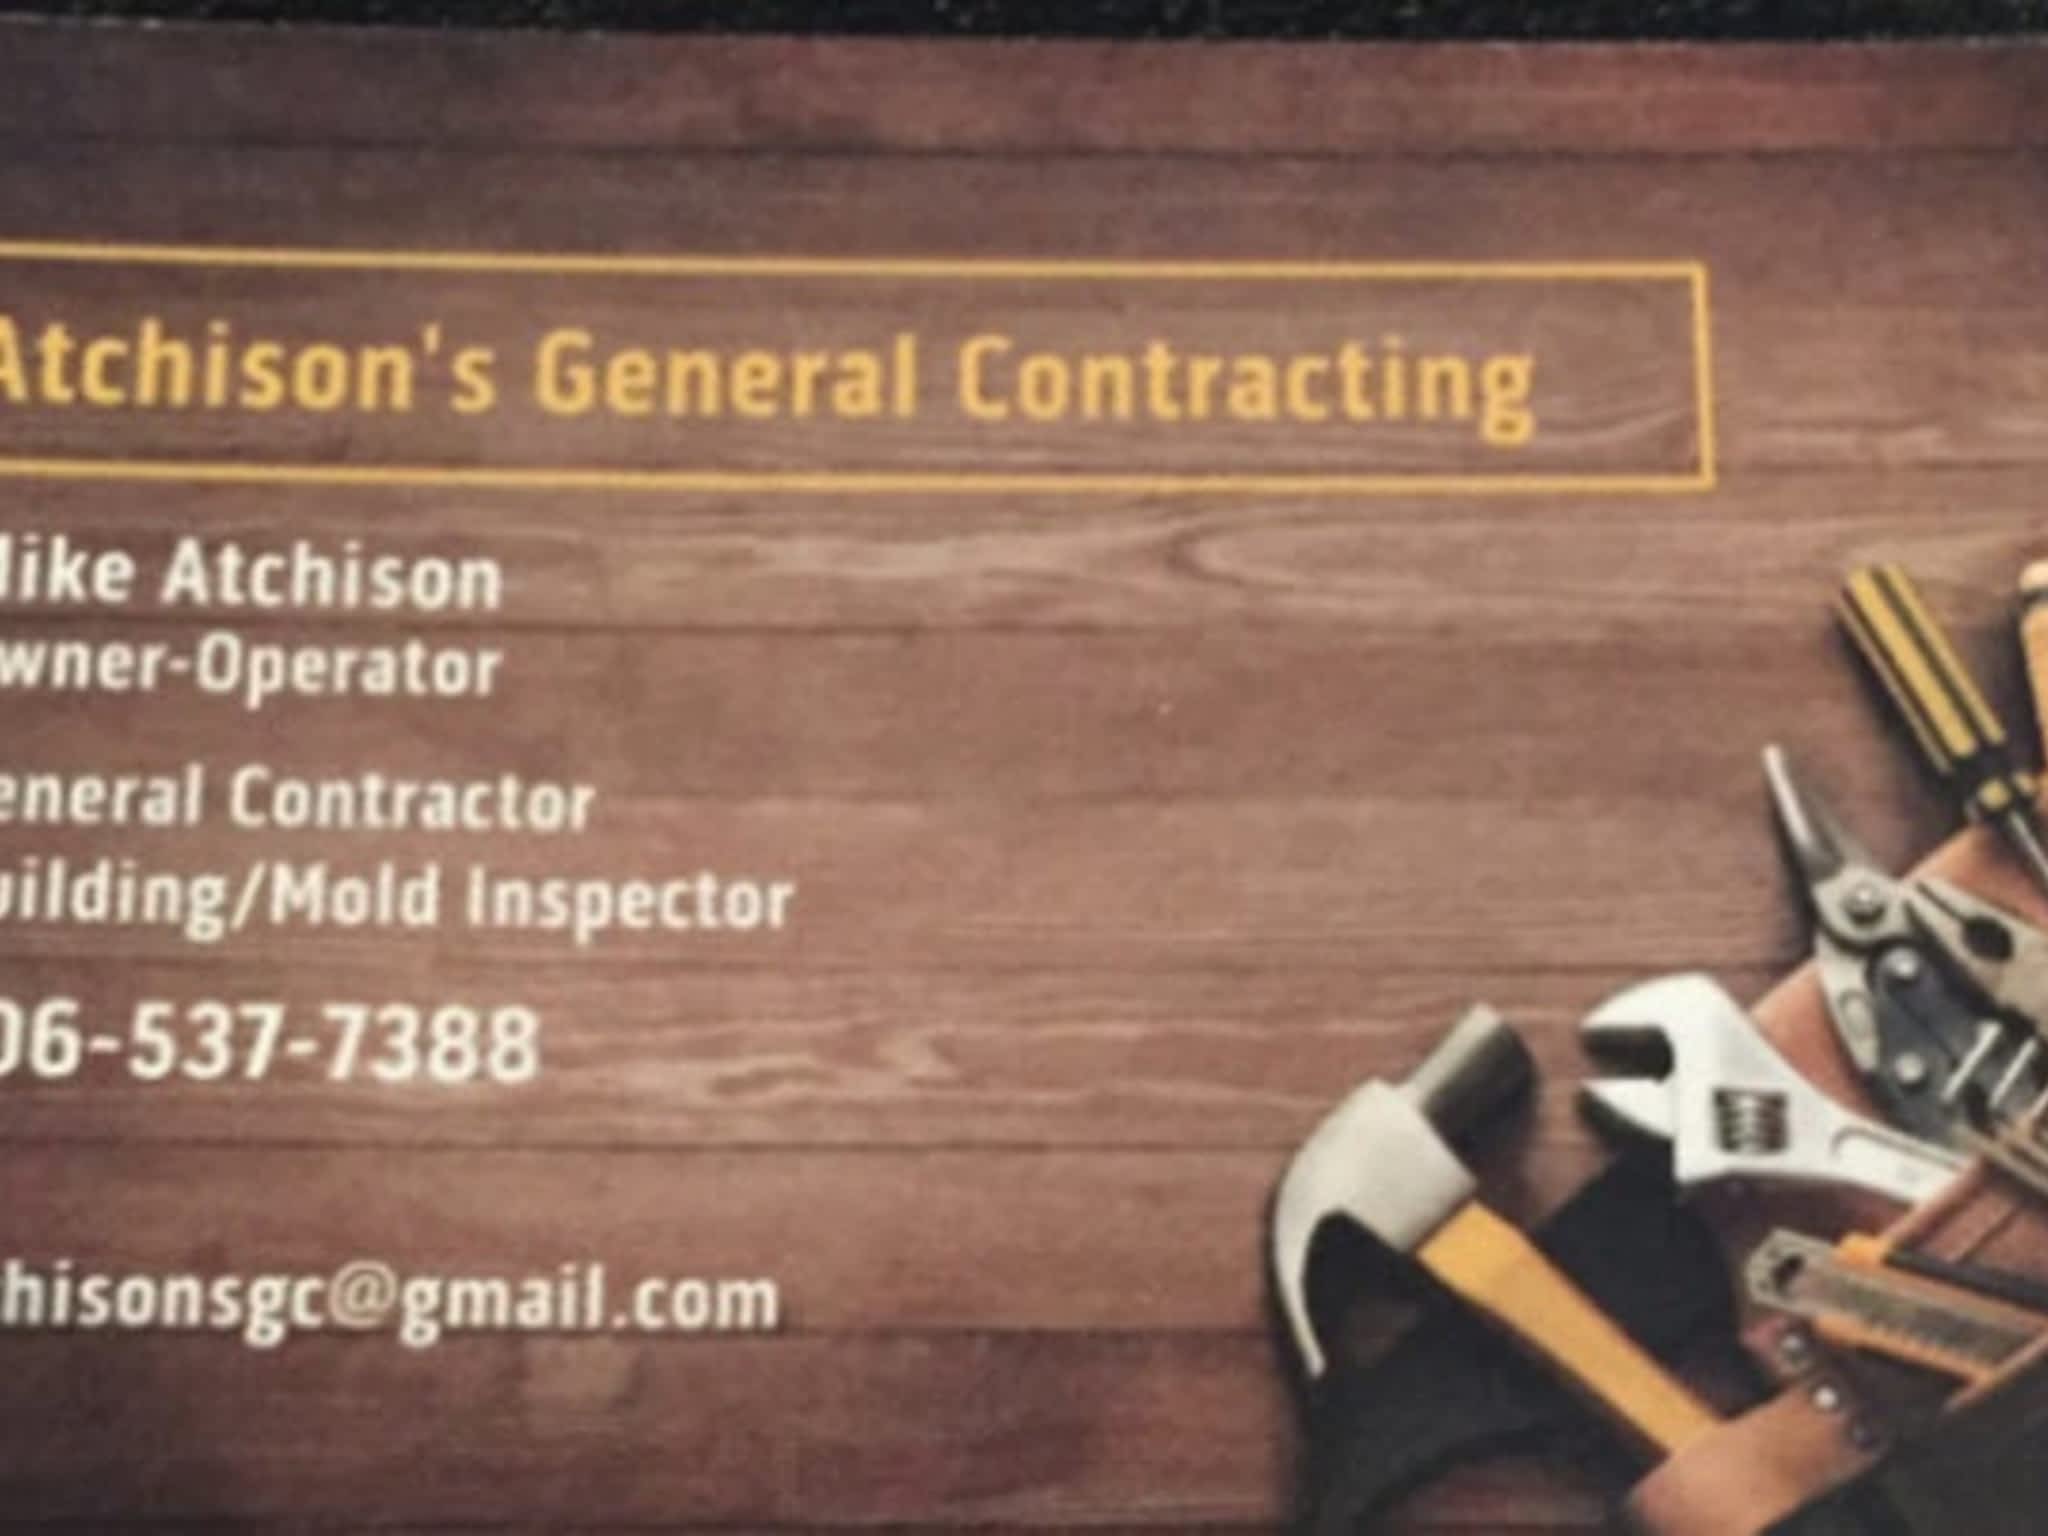 photo Atchisons General Contracting